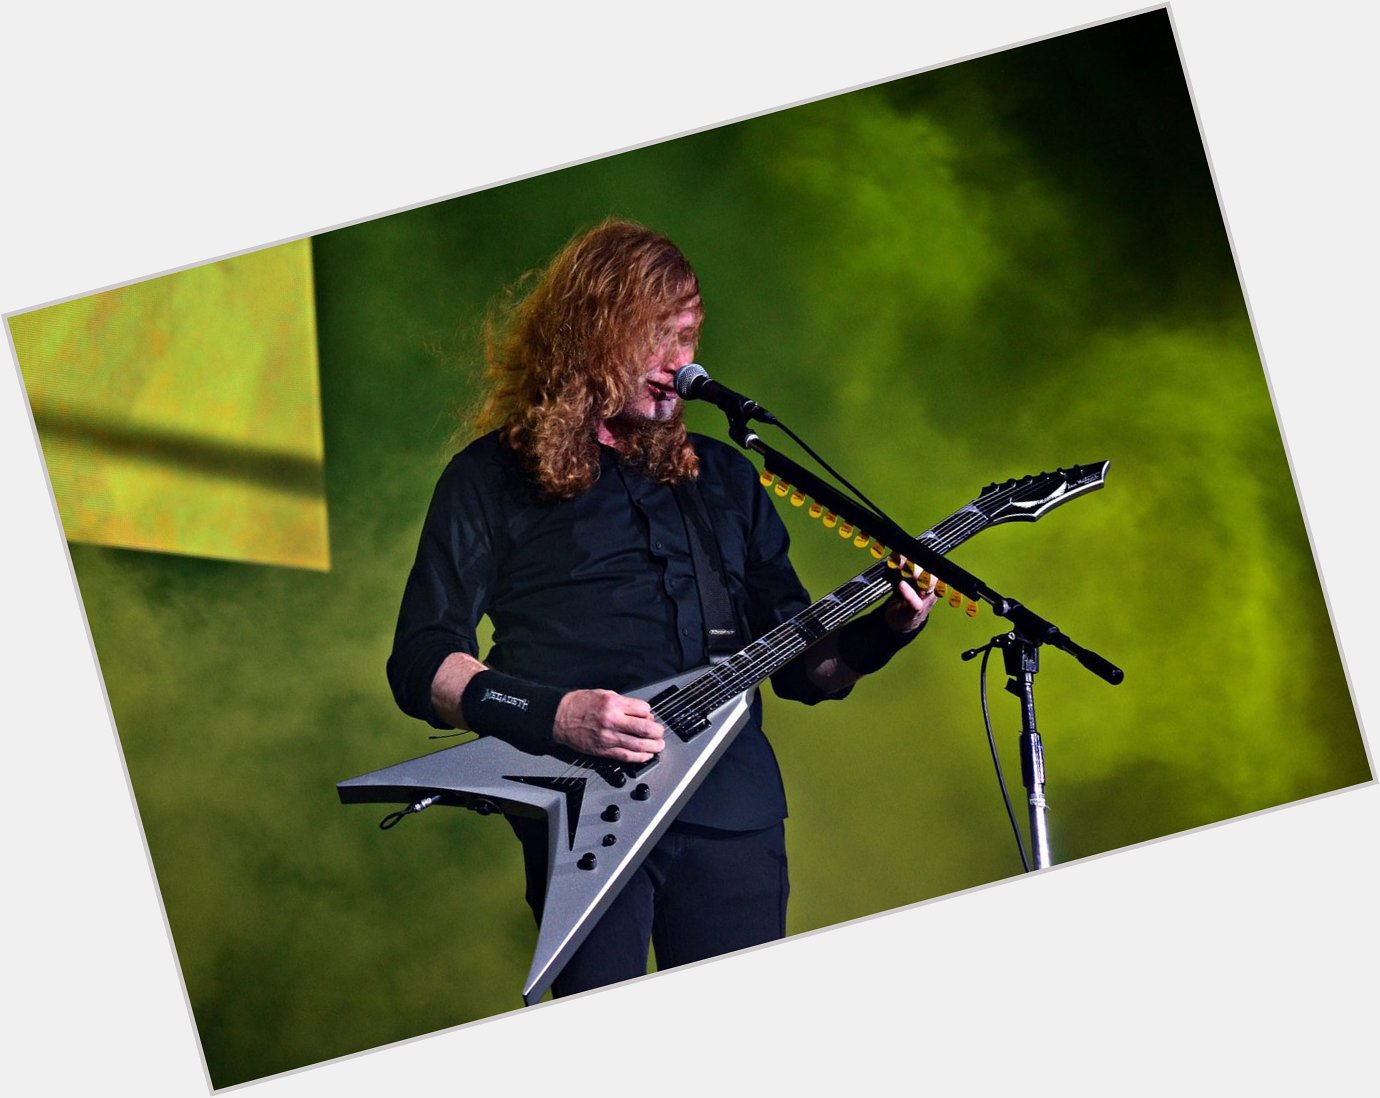 Happy 57th birthday Dave Mustaine of Megadeth!  